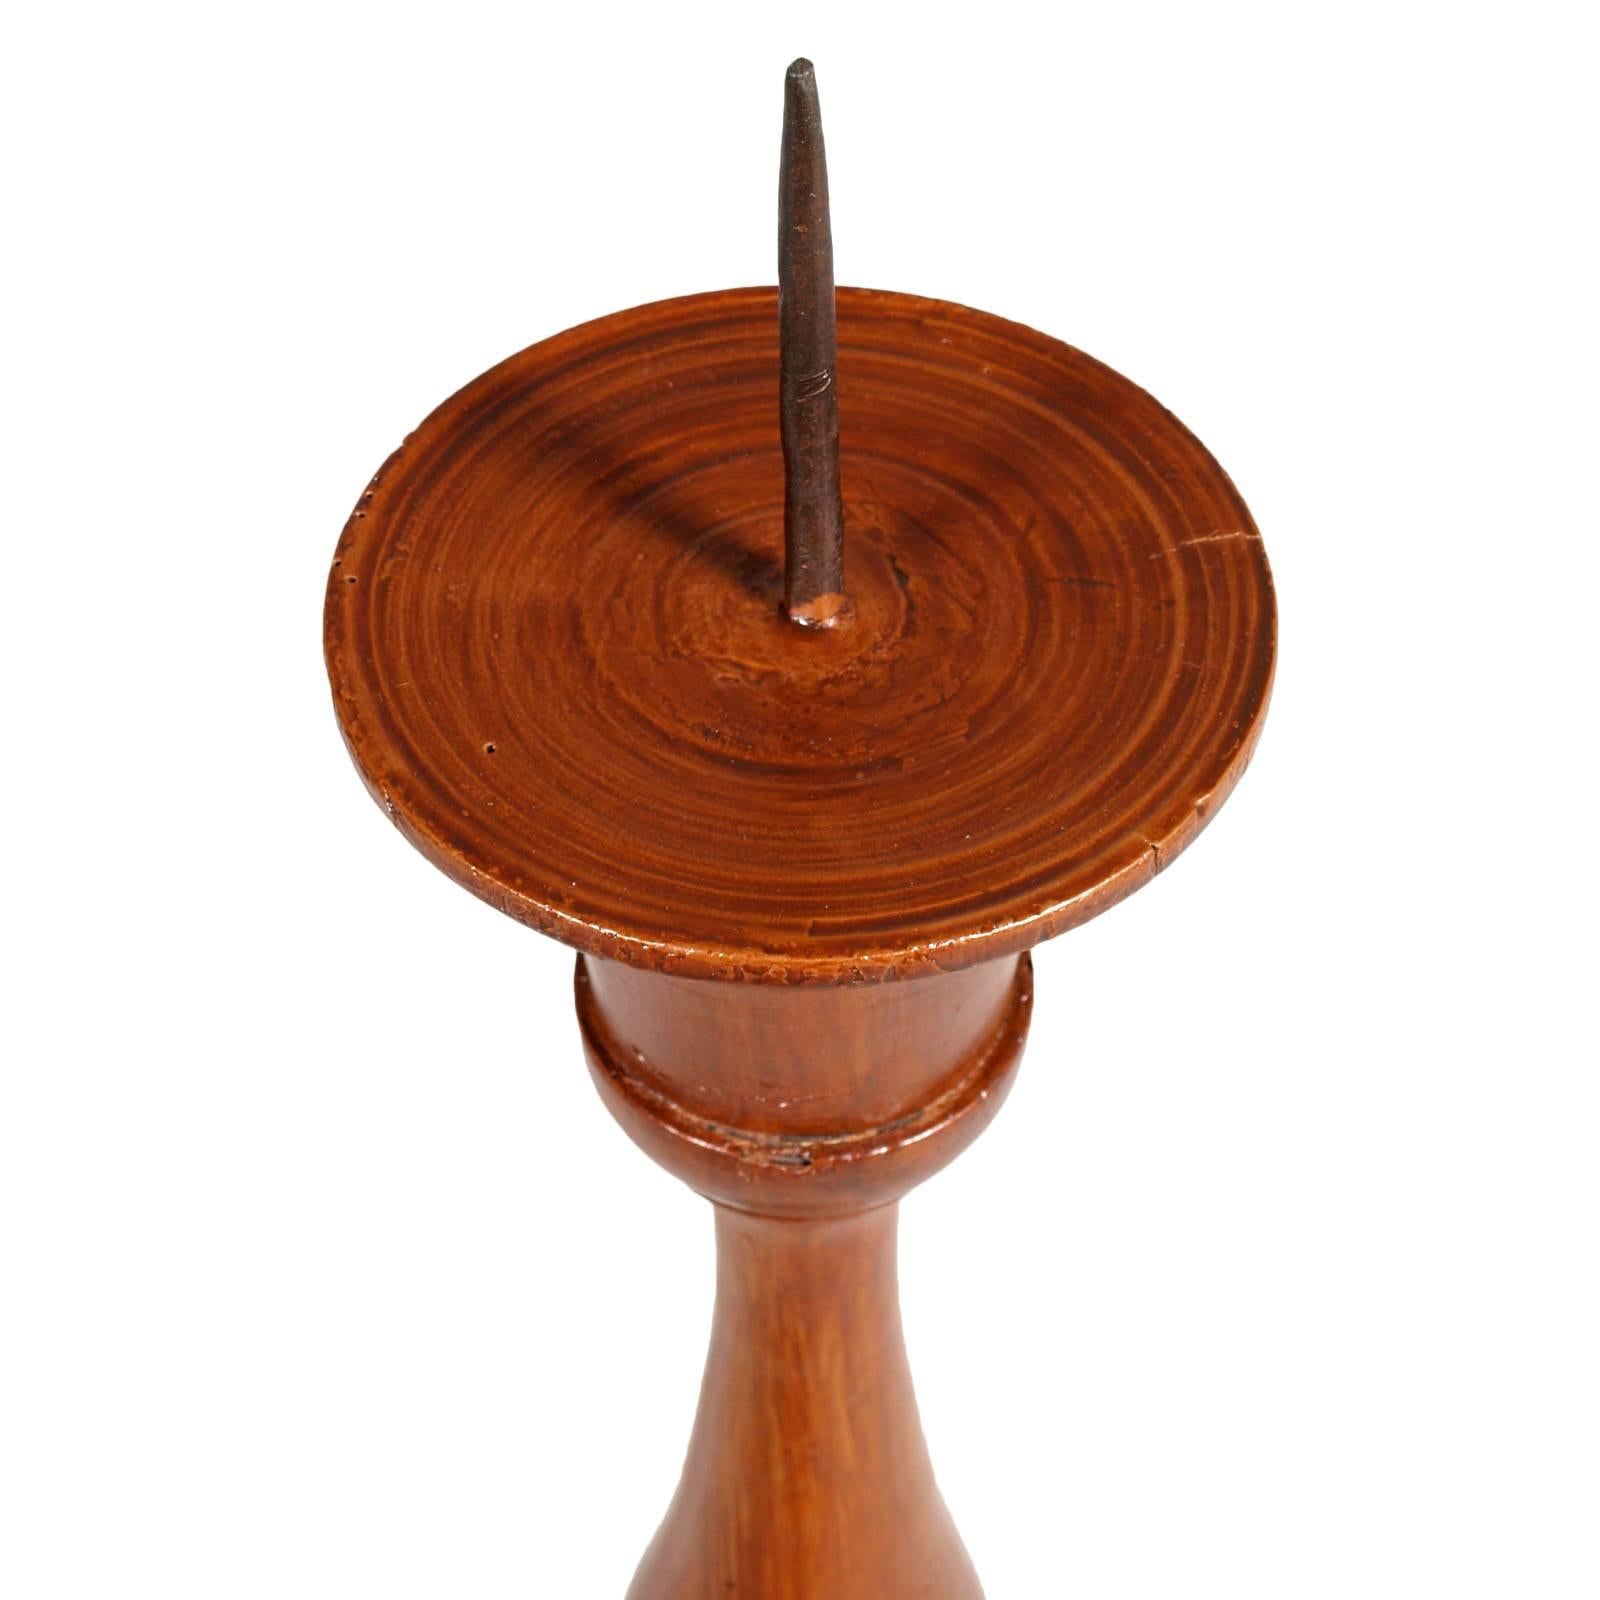 Antique walnut candelabra brown painted, period 1800s, restored and wax polished

Measures cm: Height 90, diameter 25.